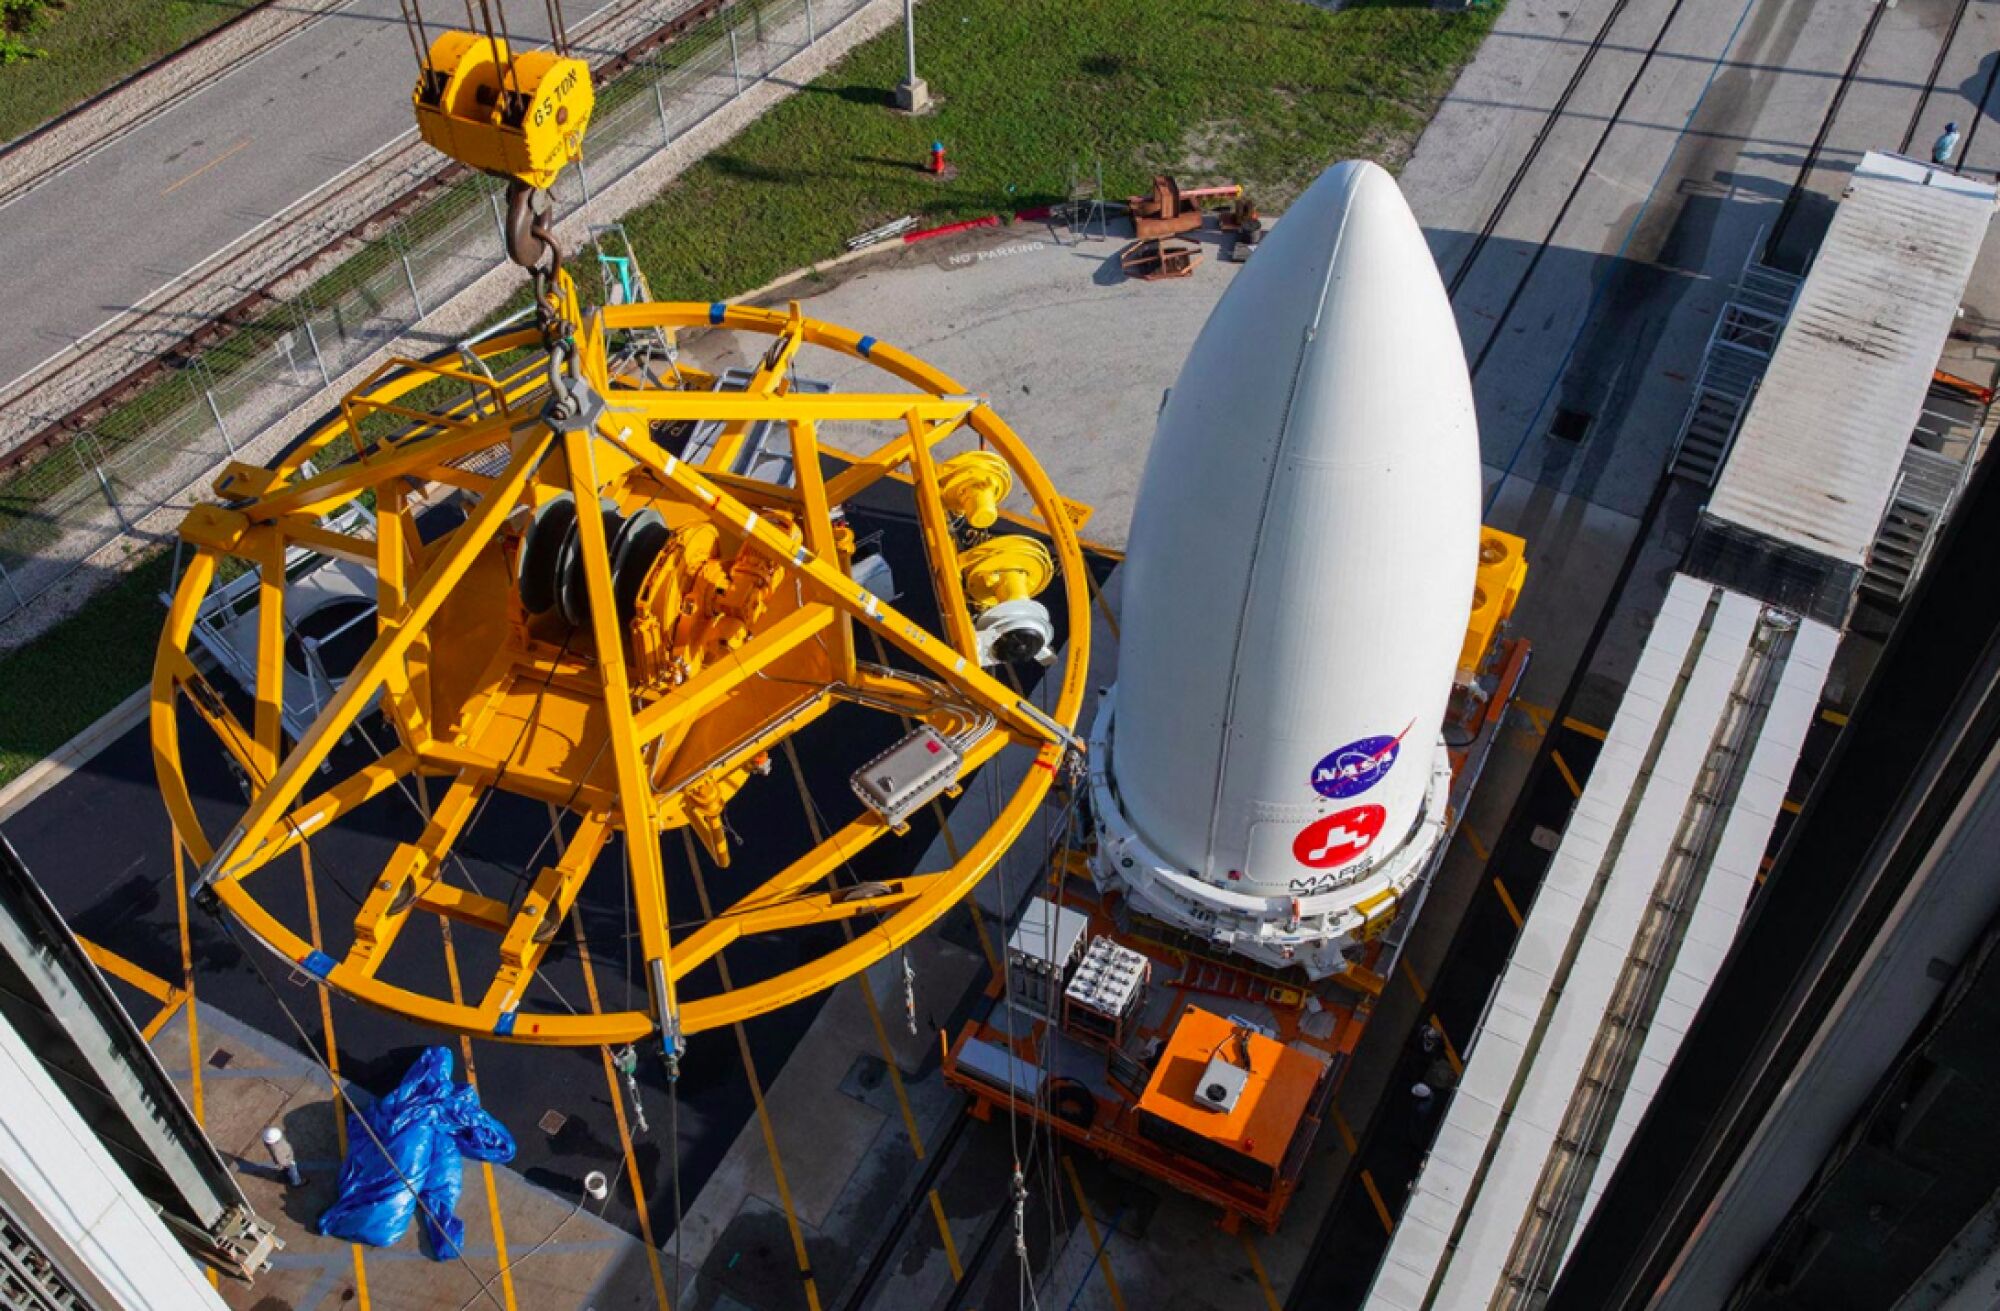 Perseverance will be launched by an Atlas V rocket at Cape Canaveral, Florida.